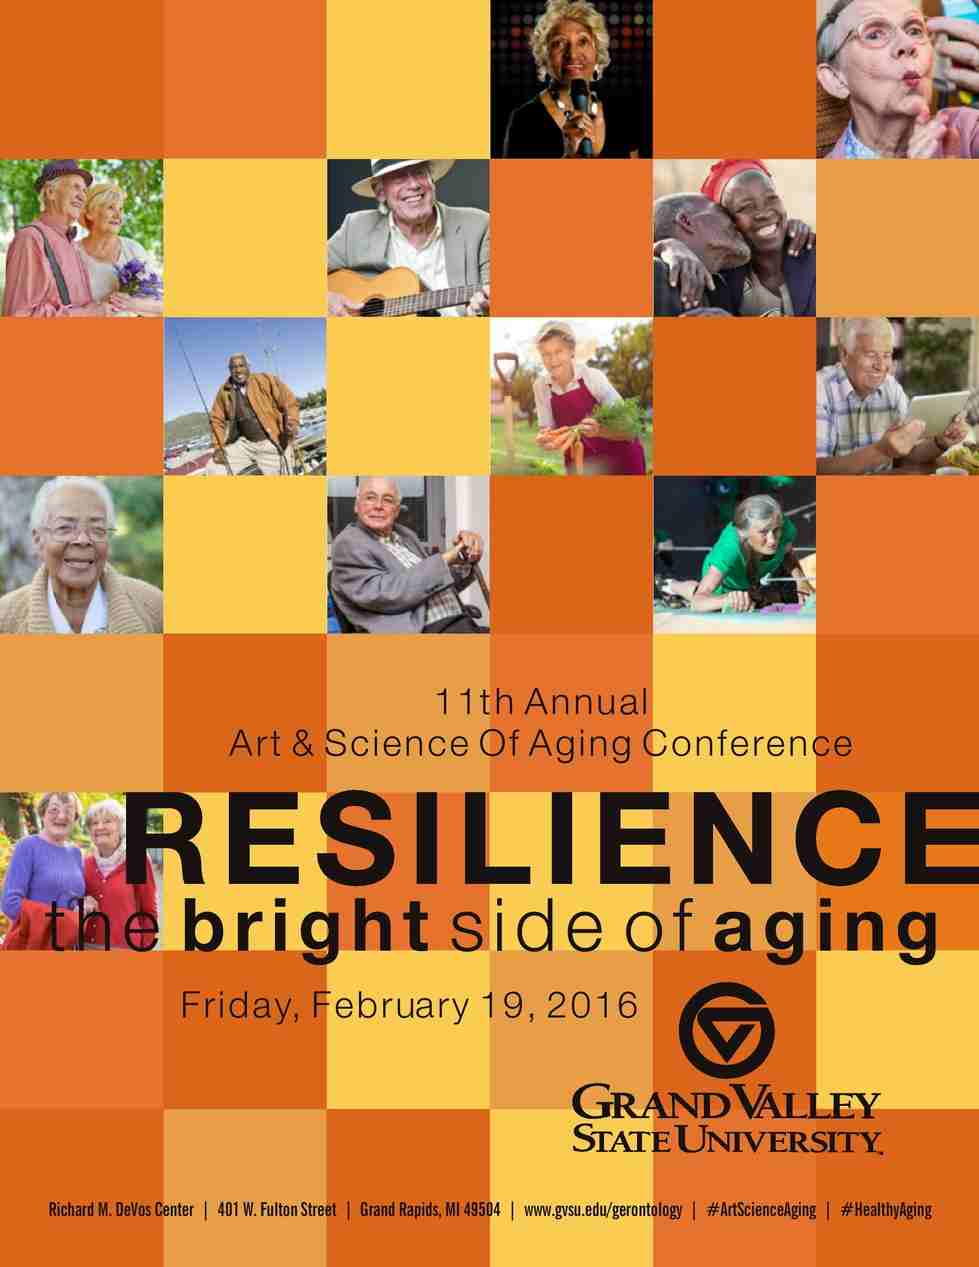 2016: Resilience: The Bright Side of Aging